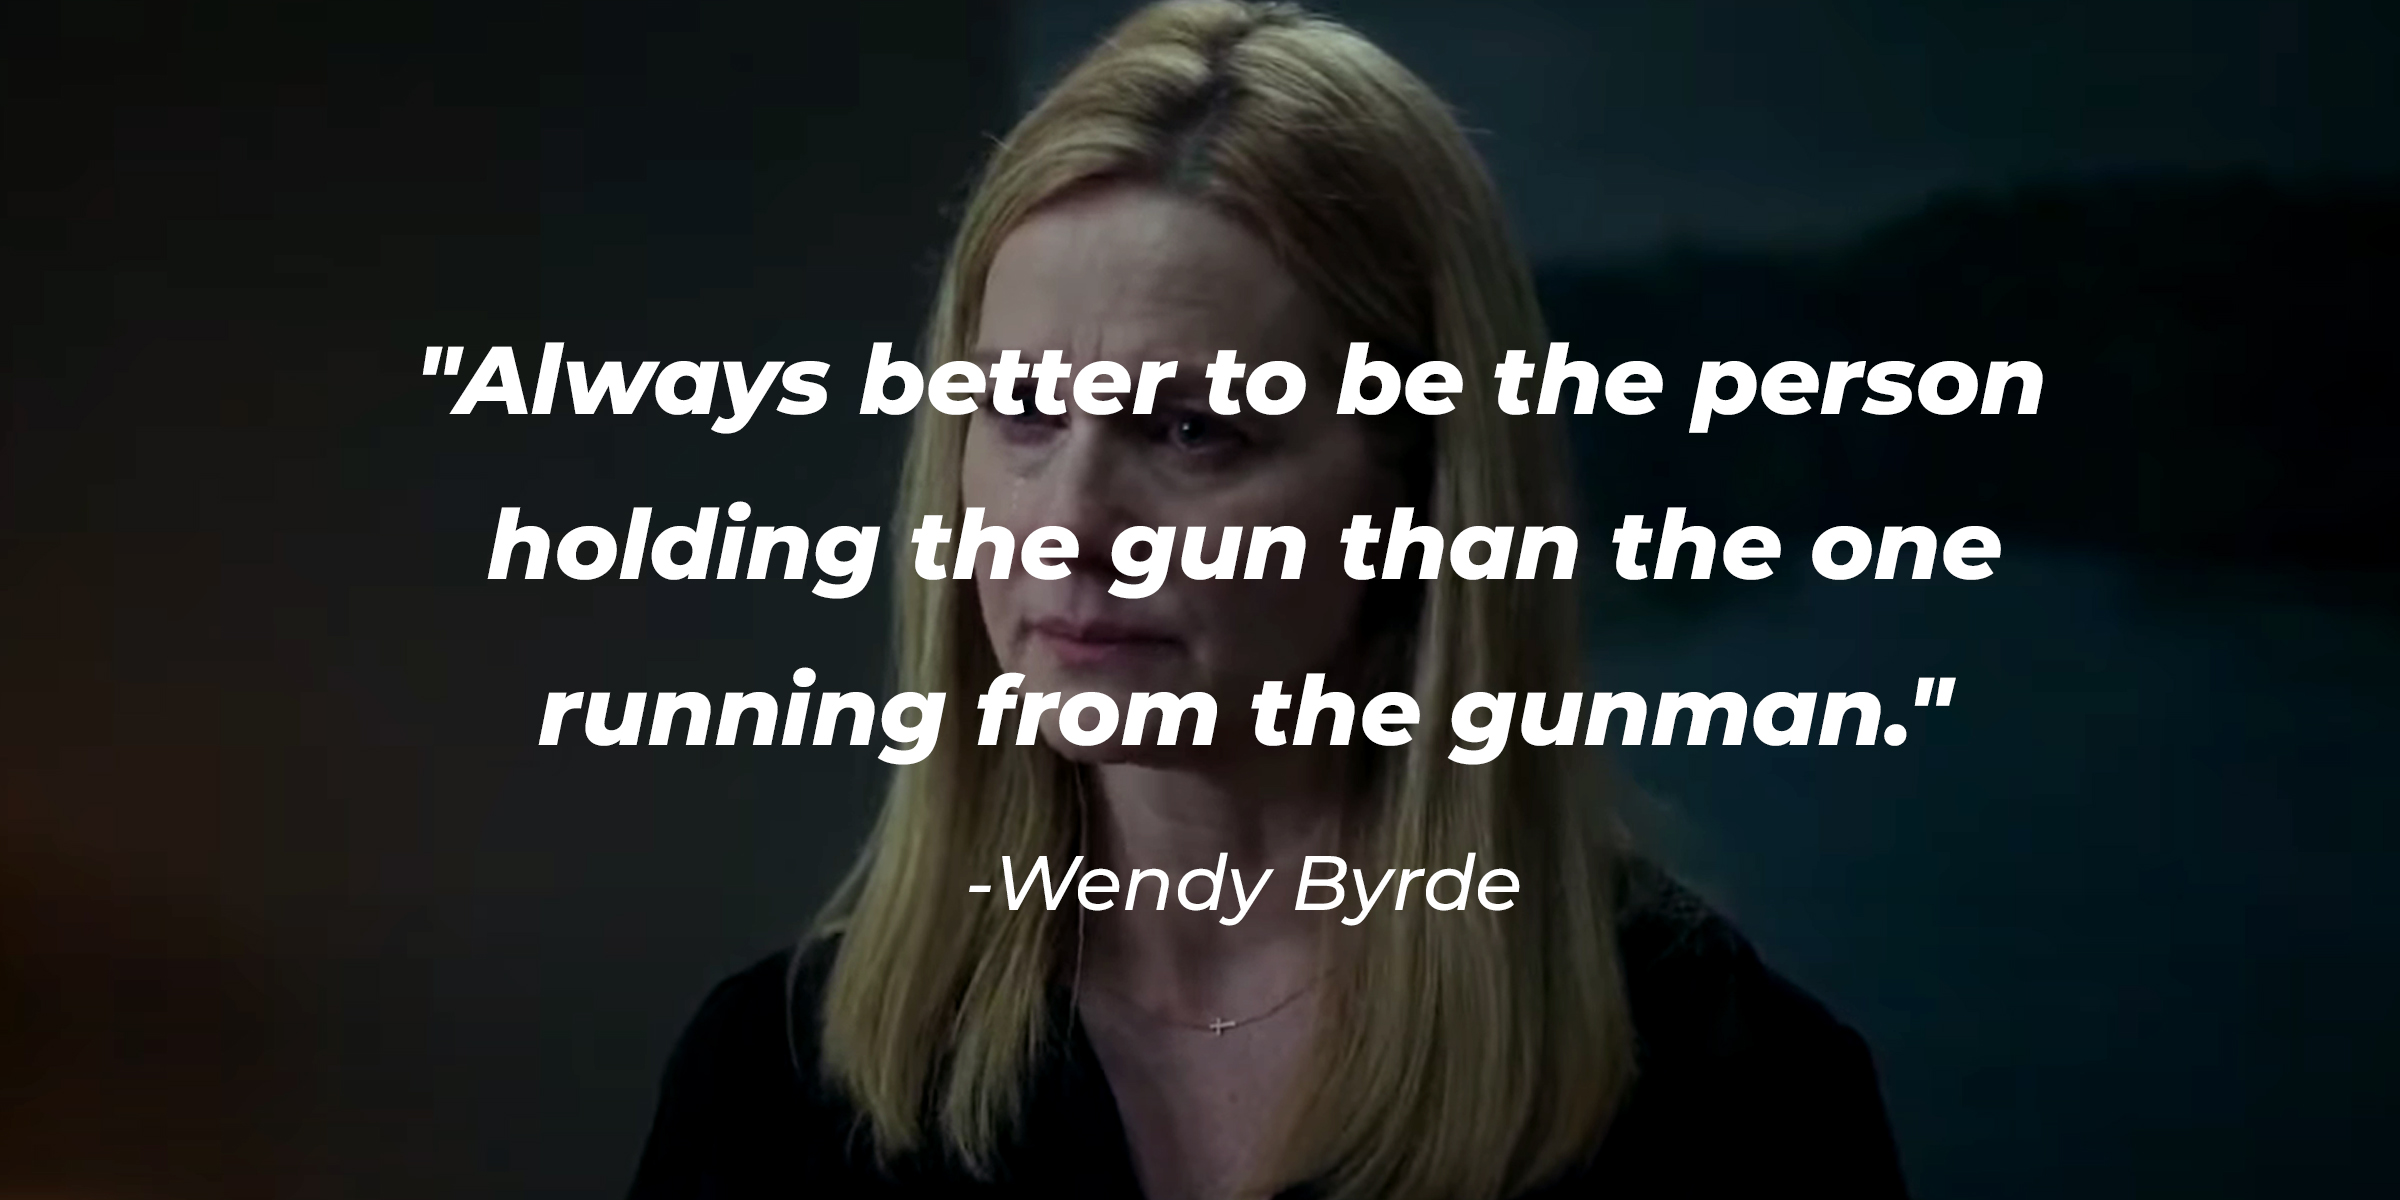 Wendy Byrde’s quote: “Always better to be the person holding the gun than the one running from the gunman.” | Source: facebook.com/OzarkNetflix